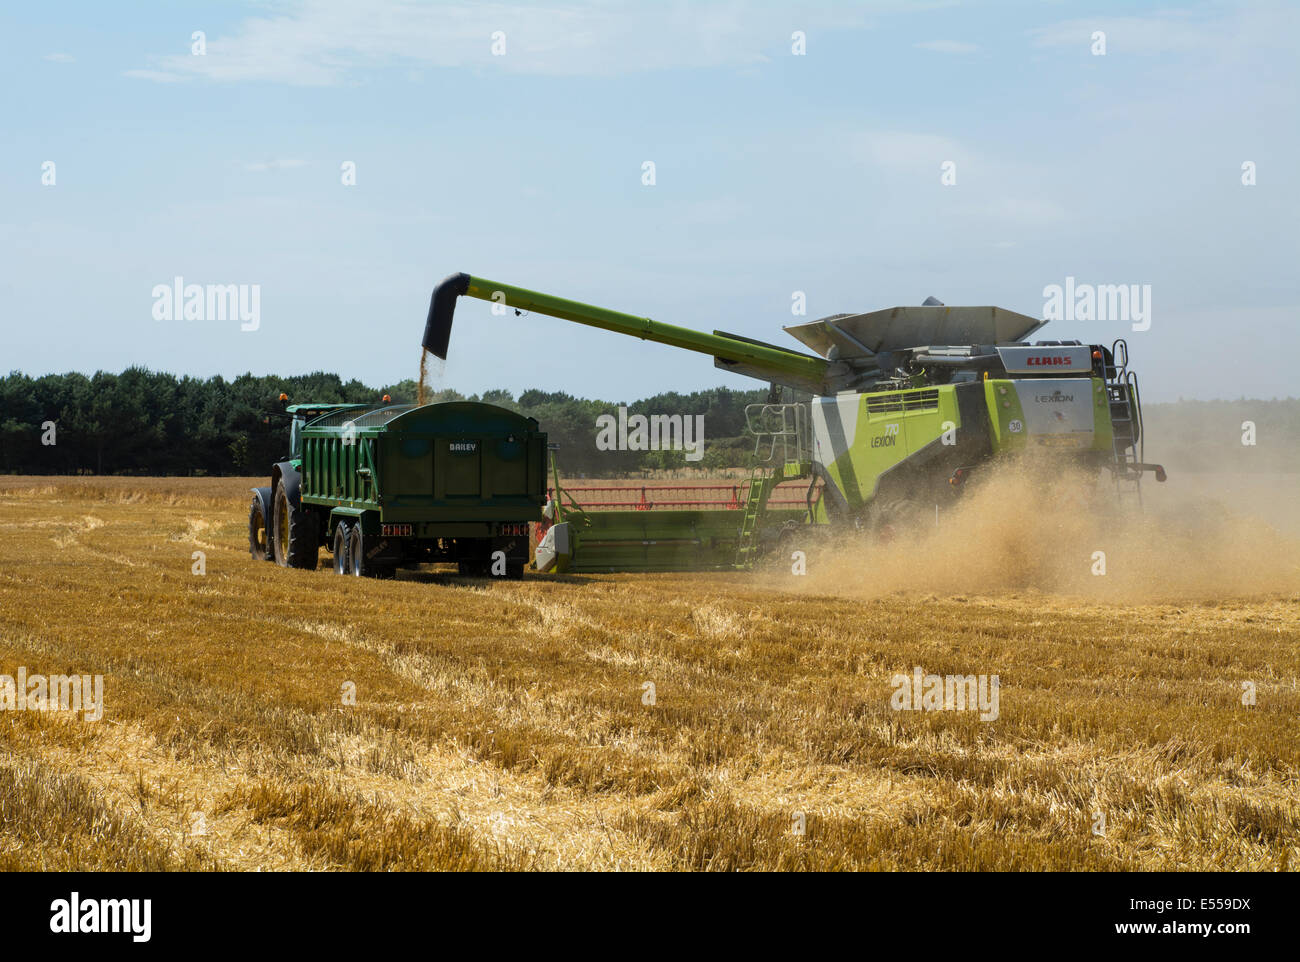 A combine harvester processing wheat and transferring the grain to a waiting tractor trailer. Stock Photo